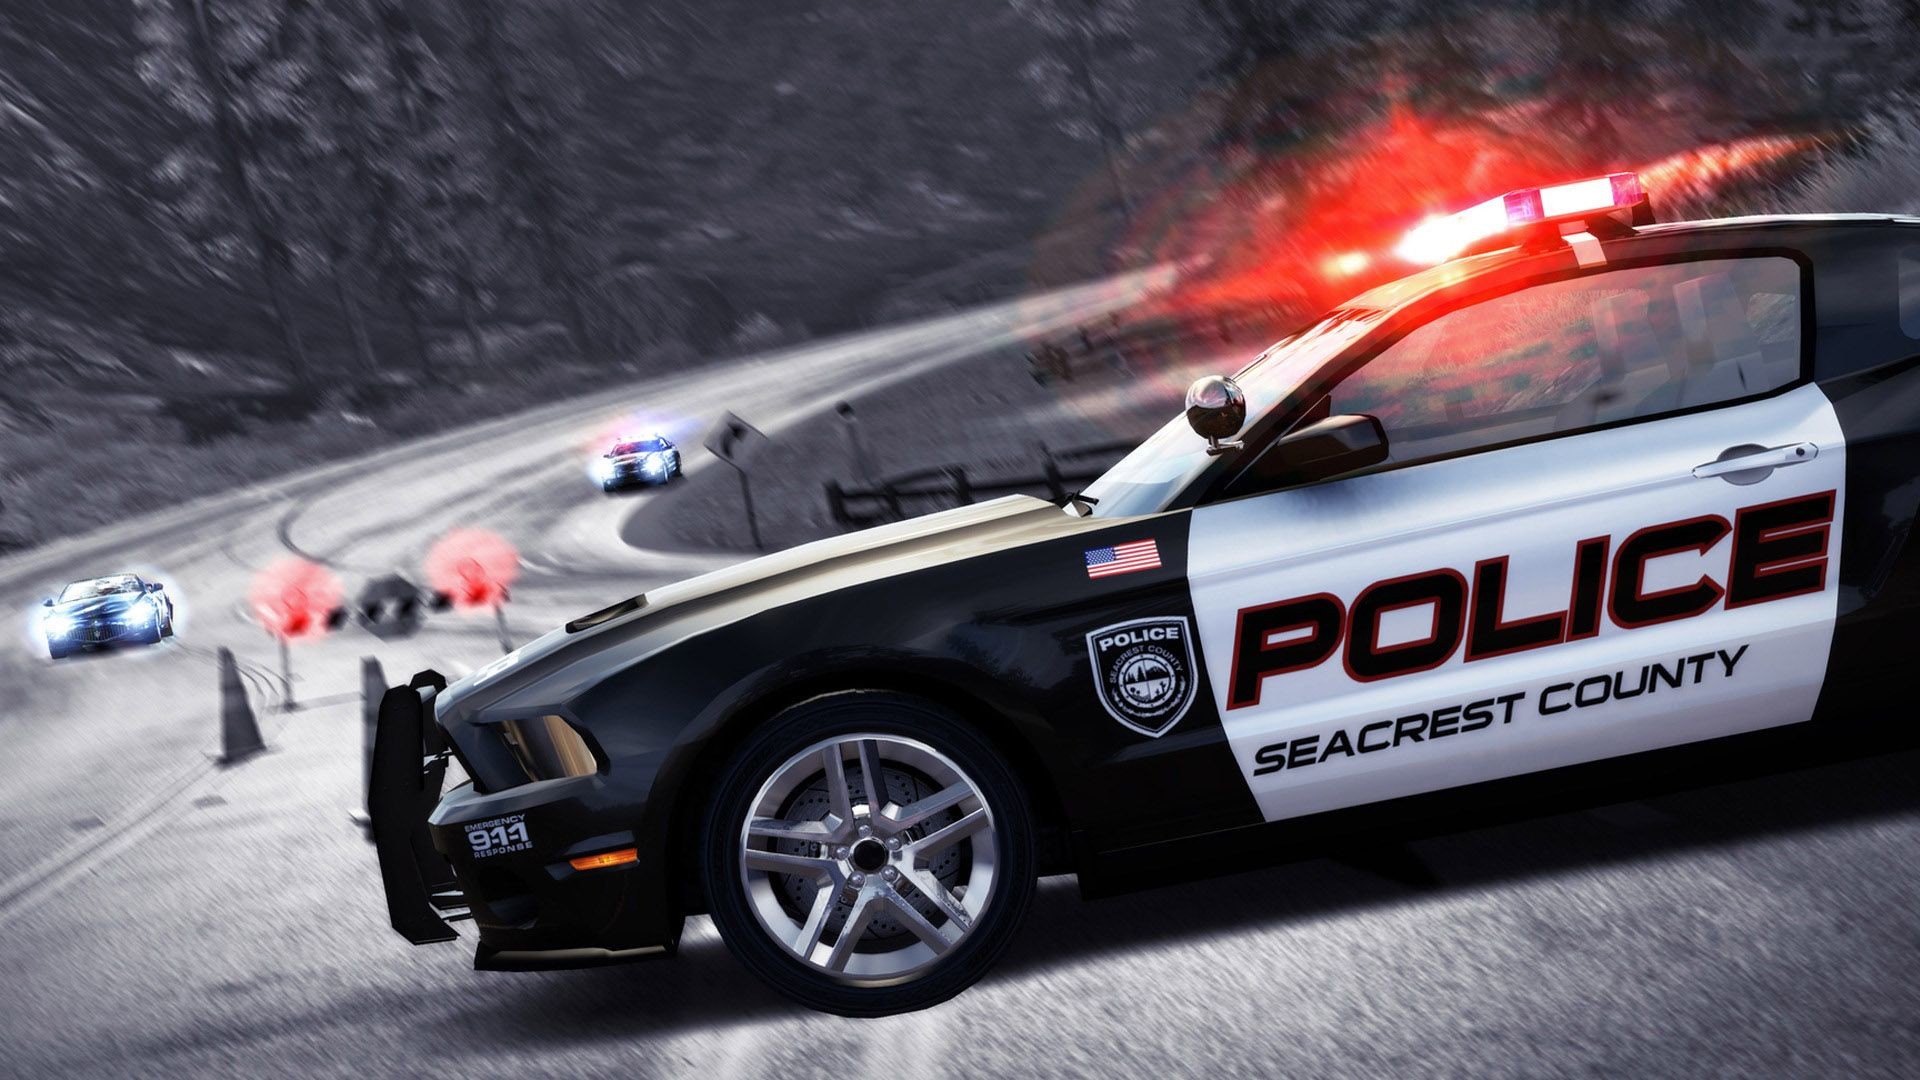 1920x1080 Police-Full-HD-Background-http-and-backgrounds-net-